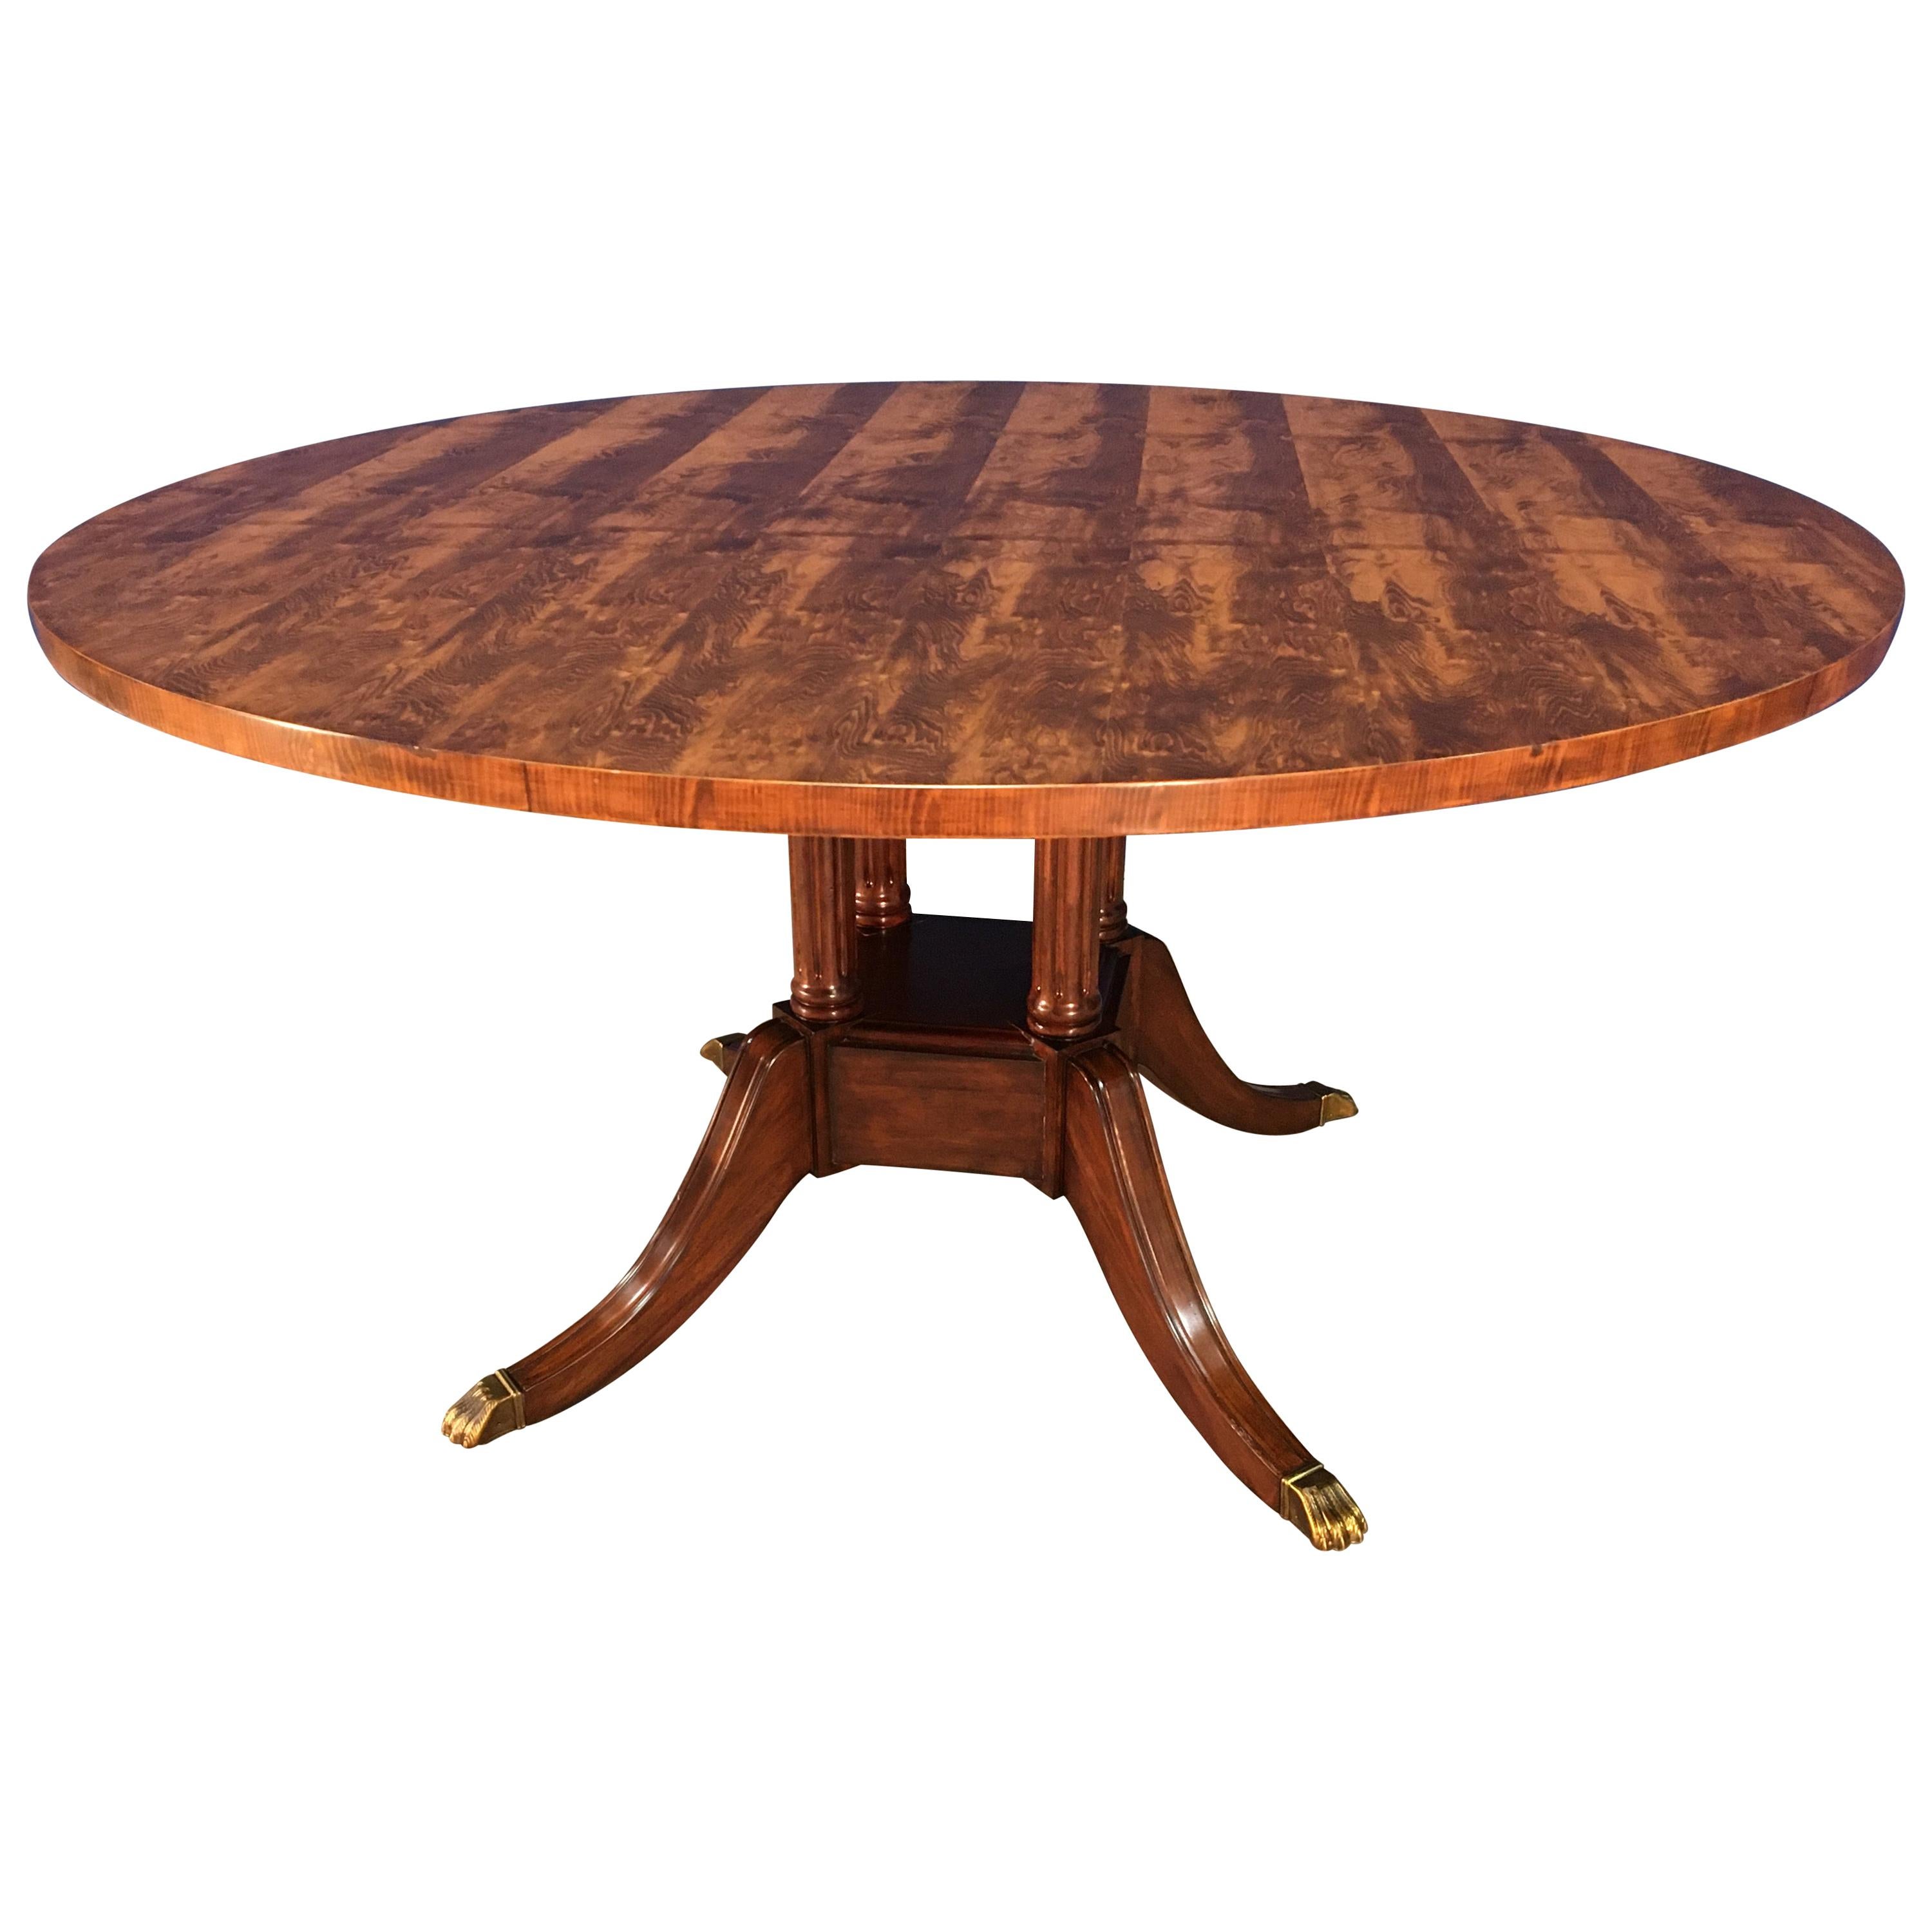 Round Yew Wood Georgian Style Pedestal Dining Table by Leighton Hall